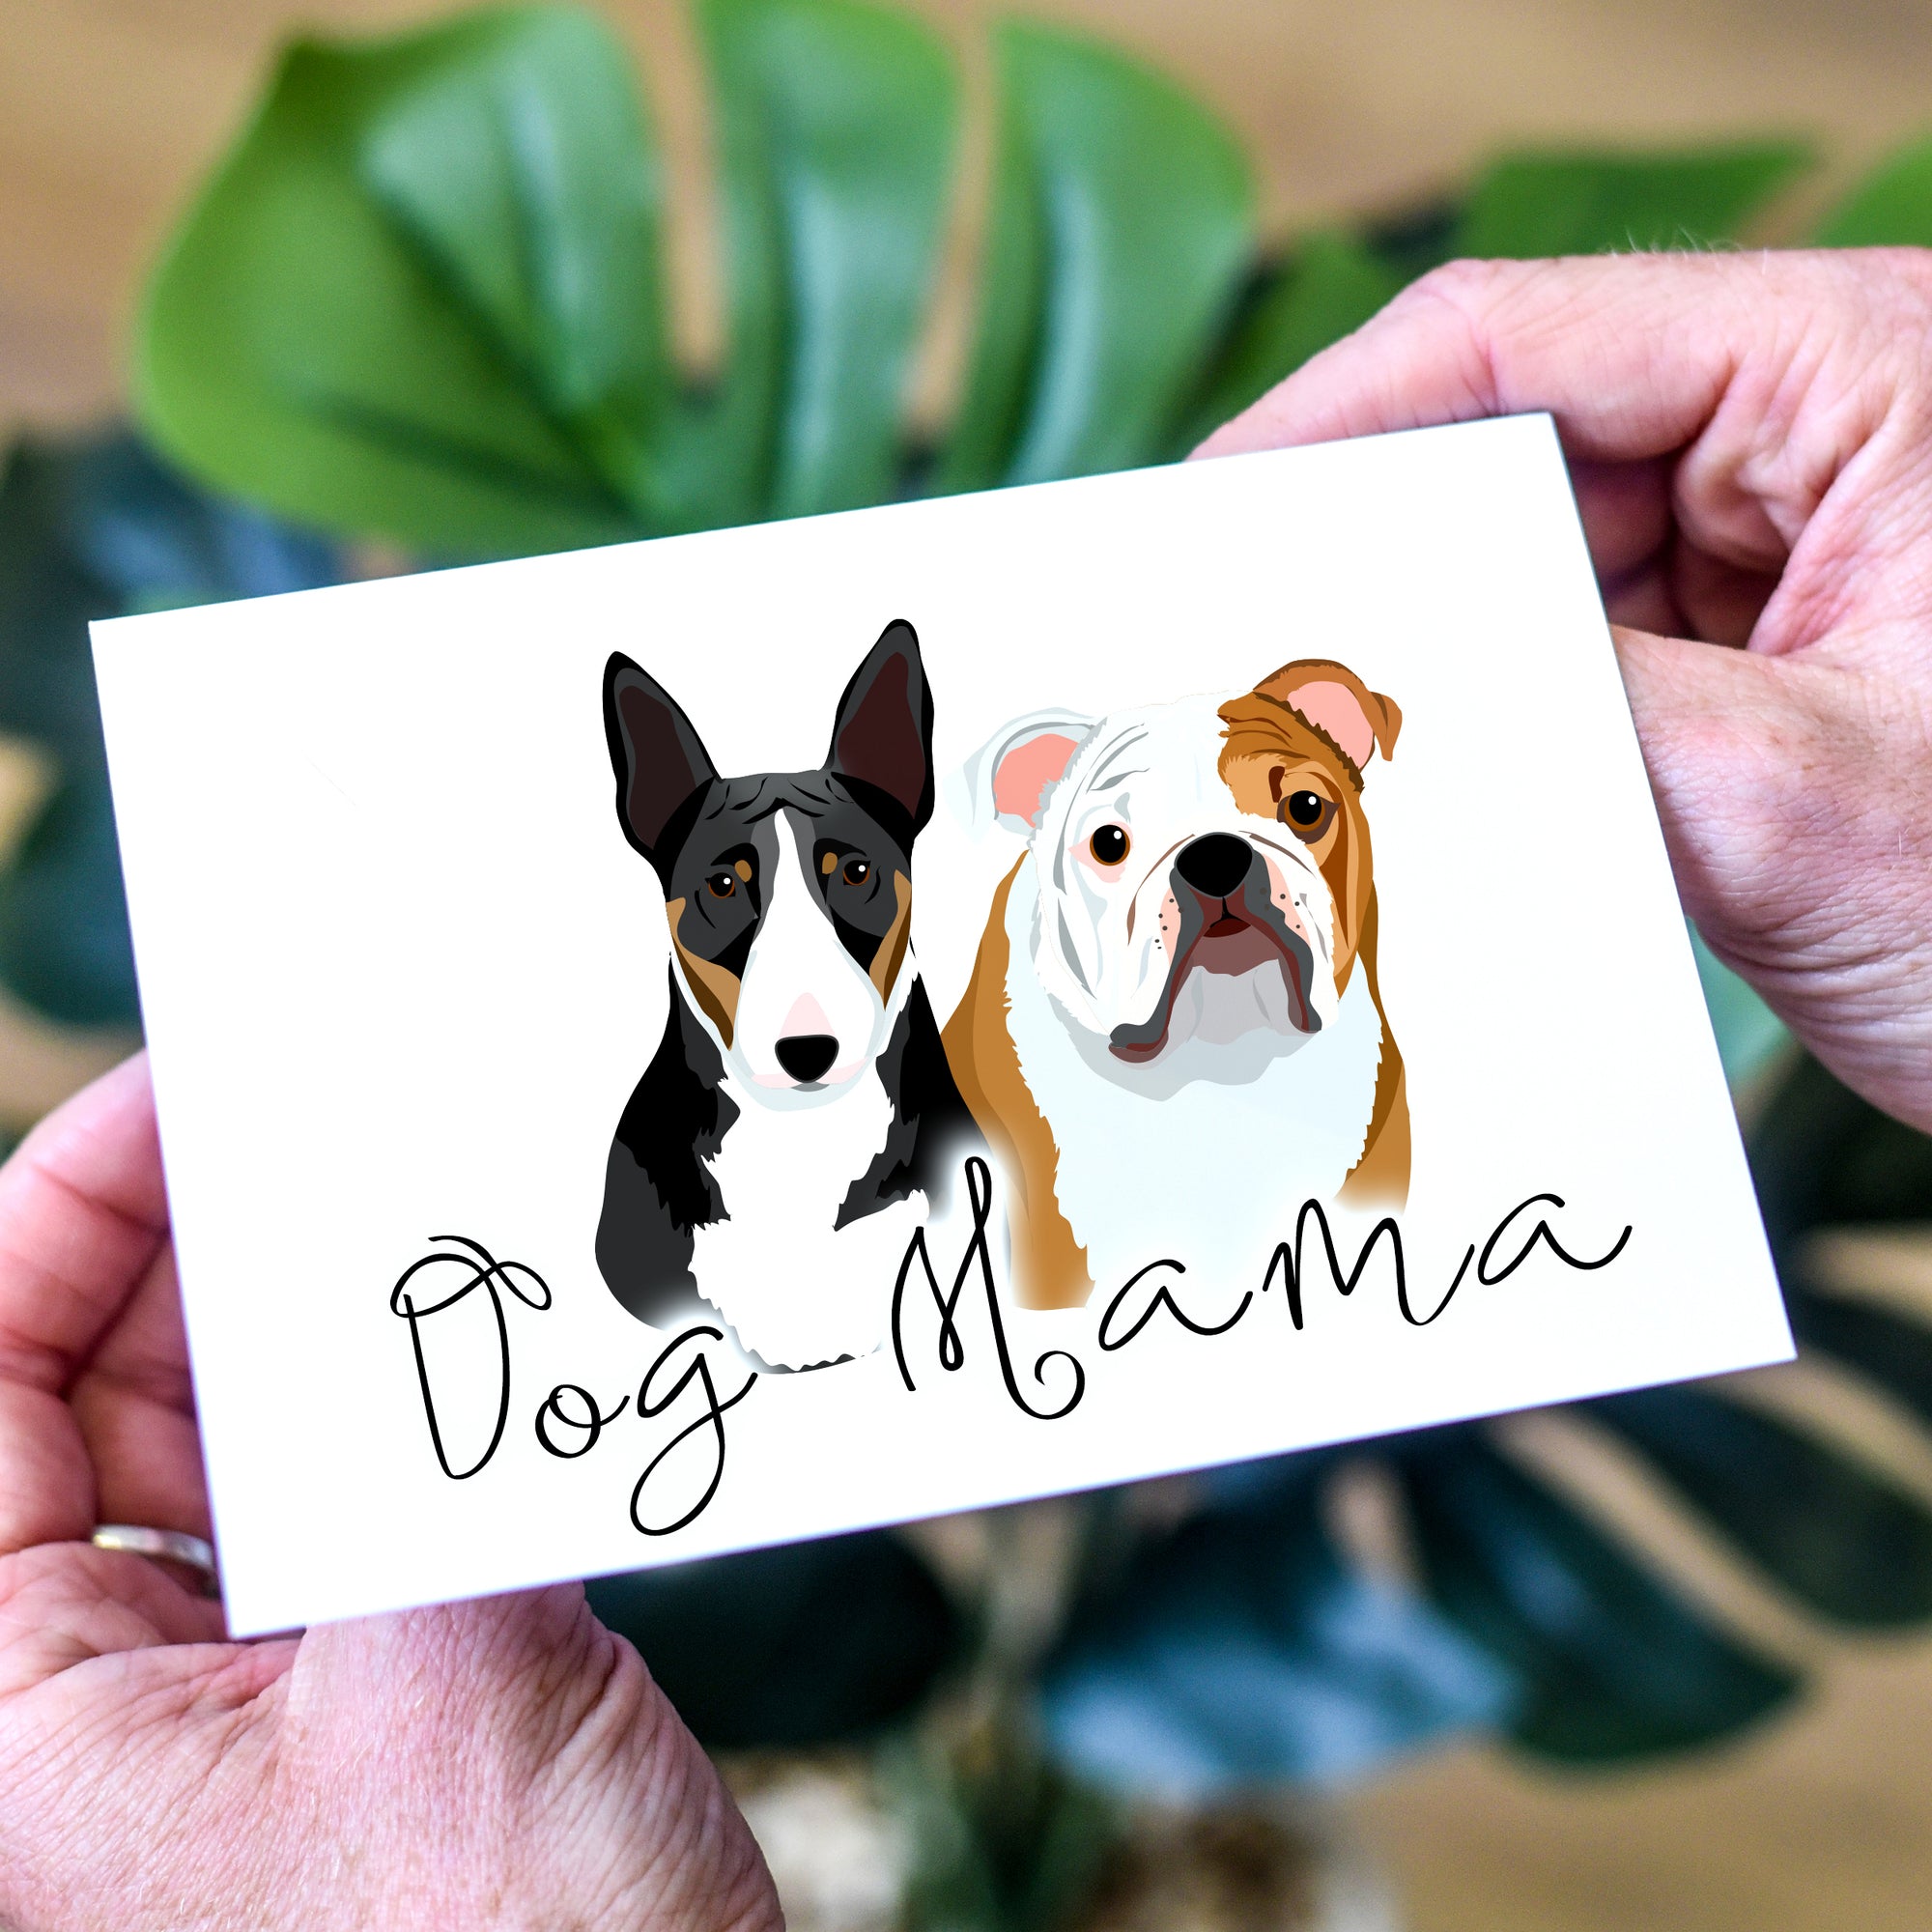 Dog Mama Card - Mother's Day Card for Dog Mums